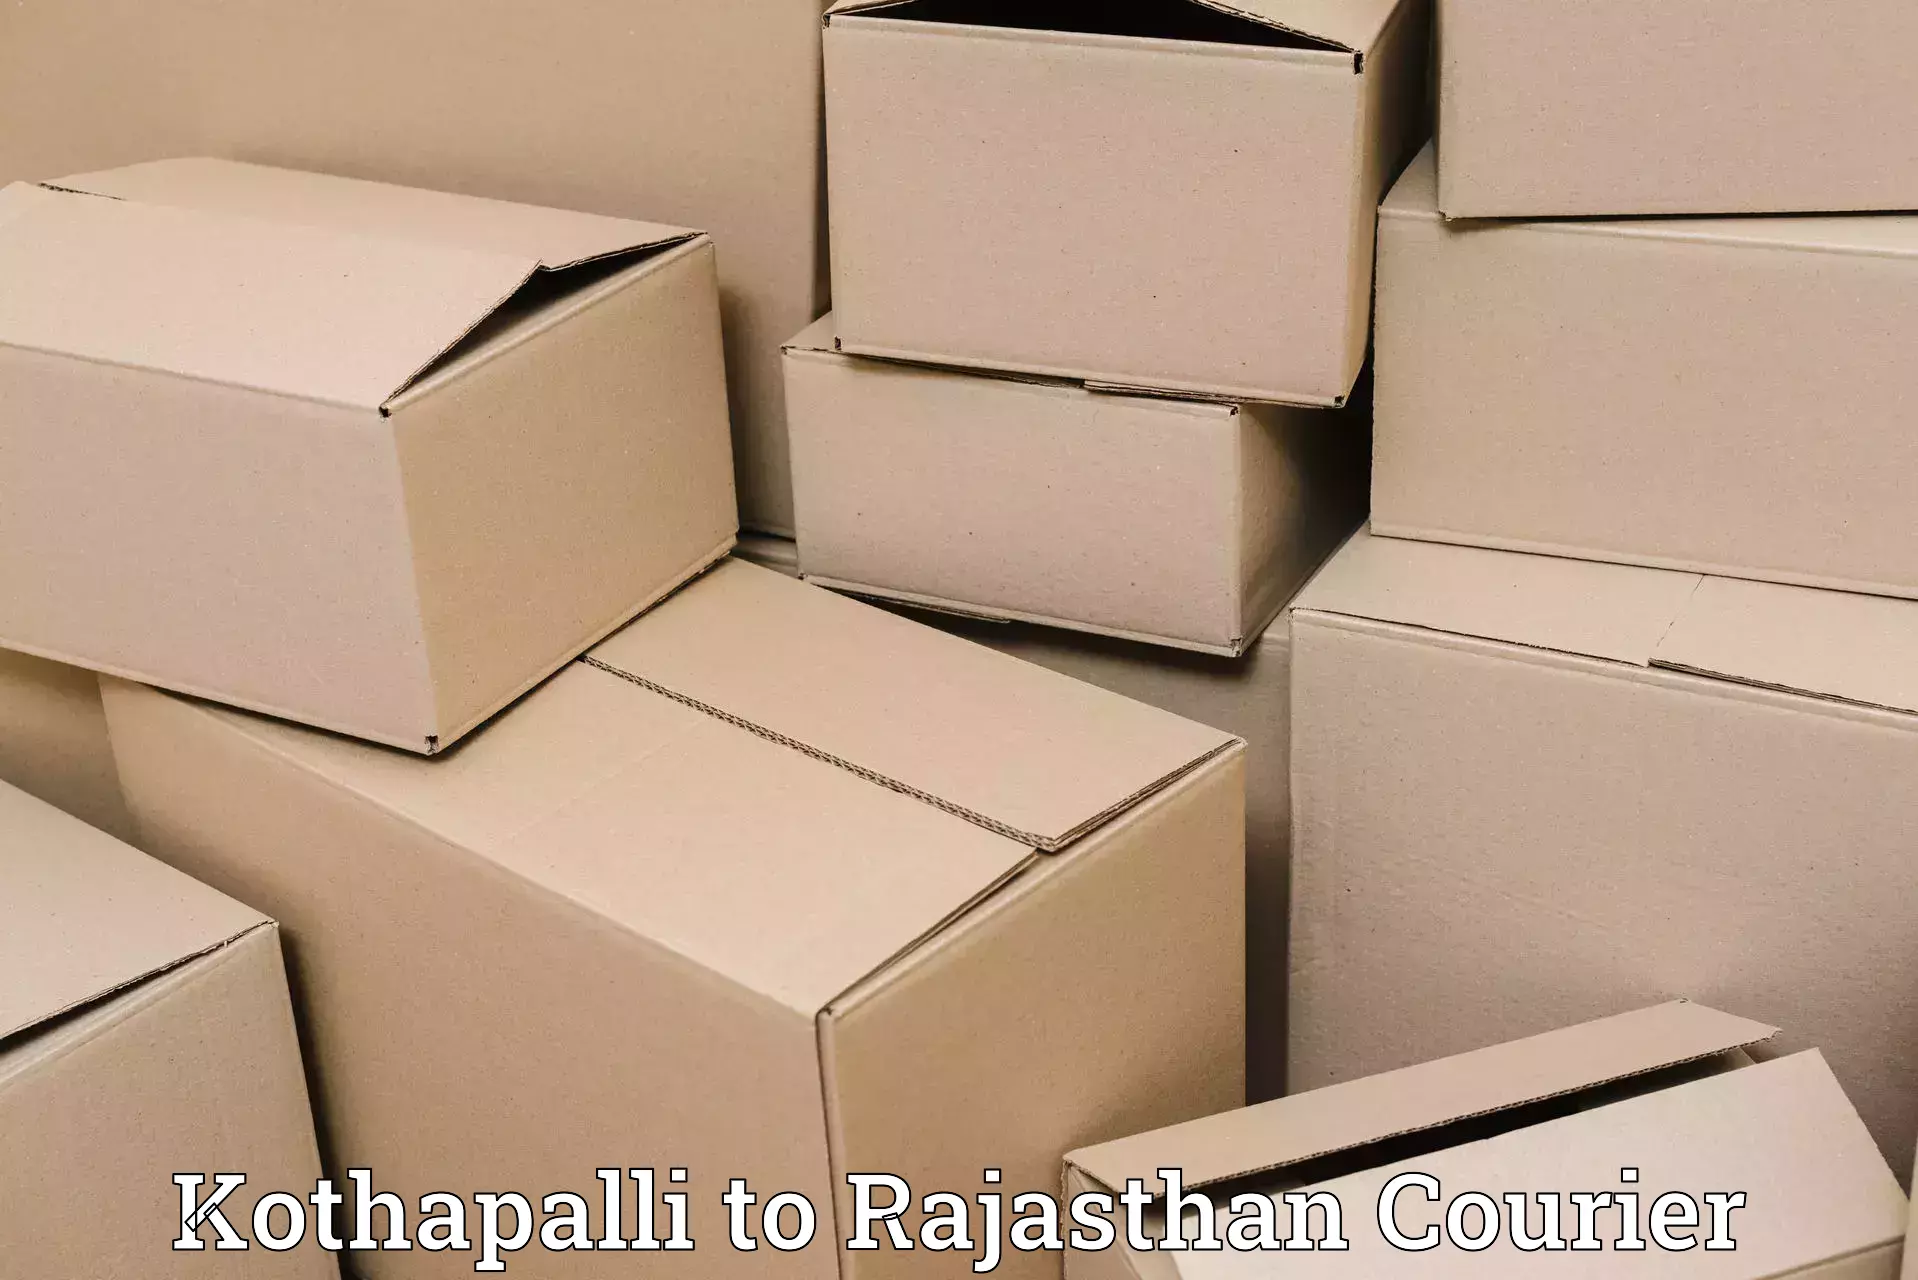 Personal parcel delivery in Kothapalli to Simalwara